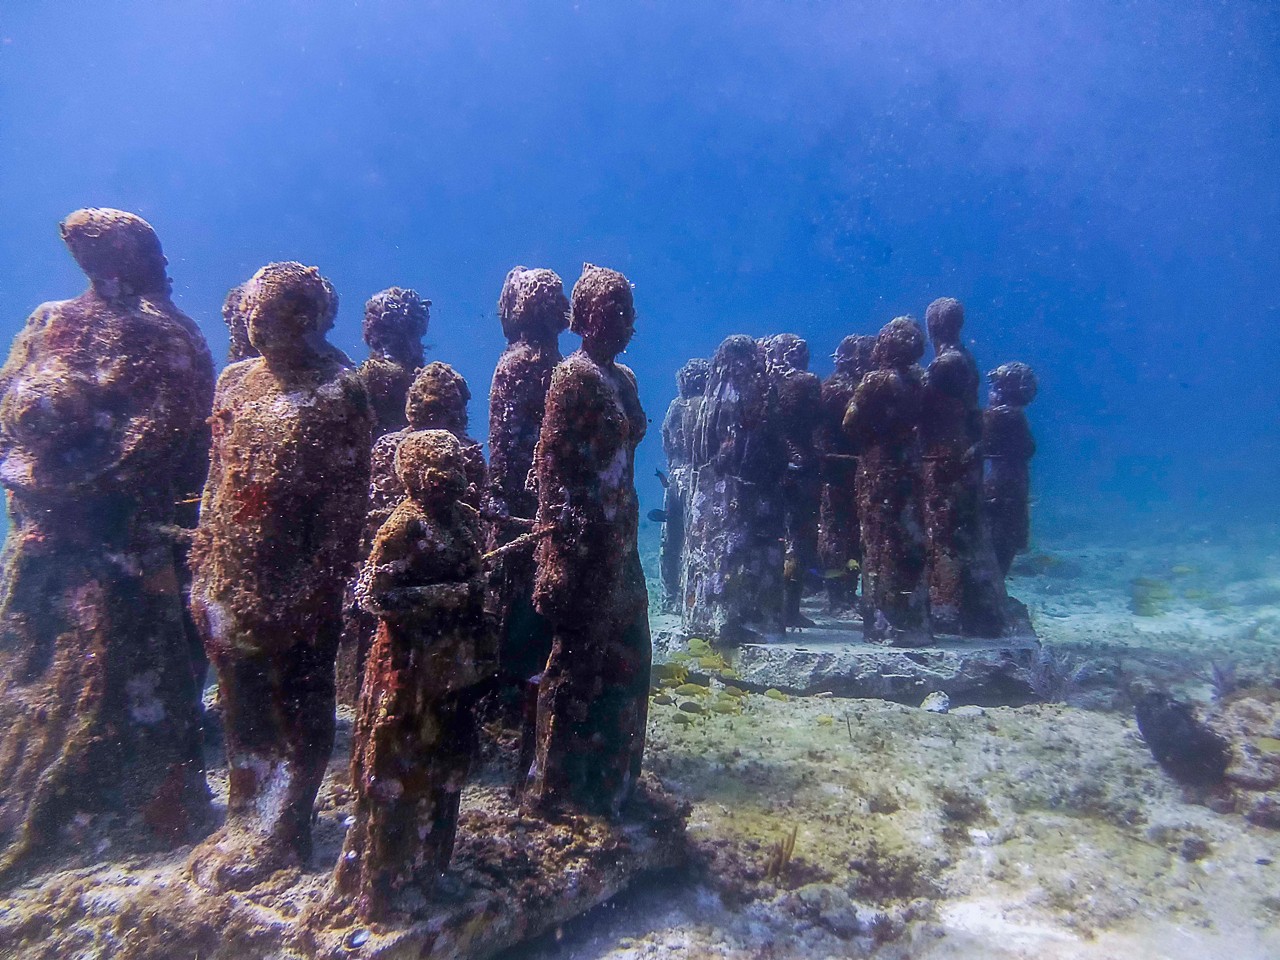 MUSA is an underwater museum and a must visit on your trip to Mexico